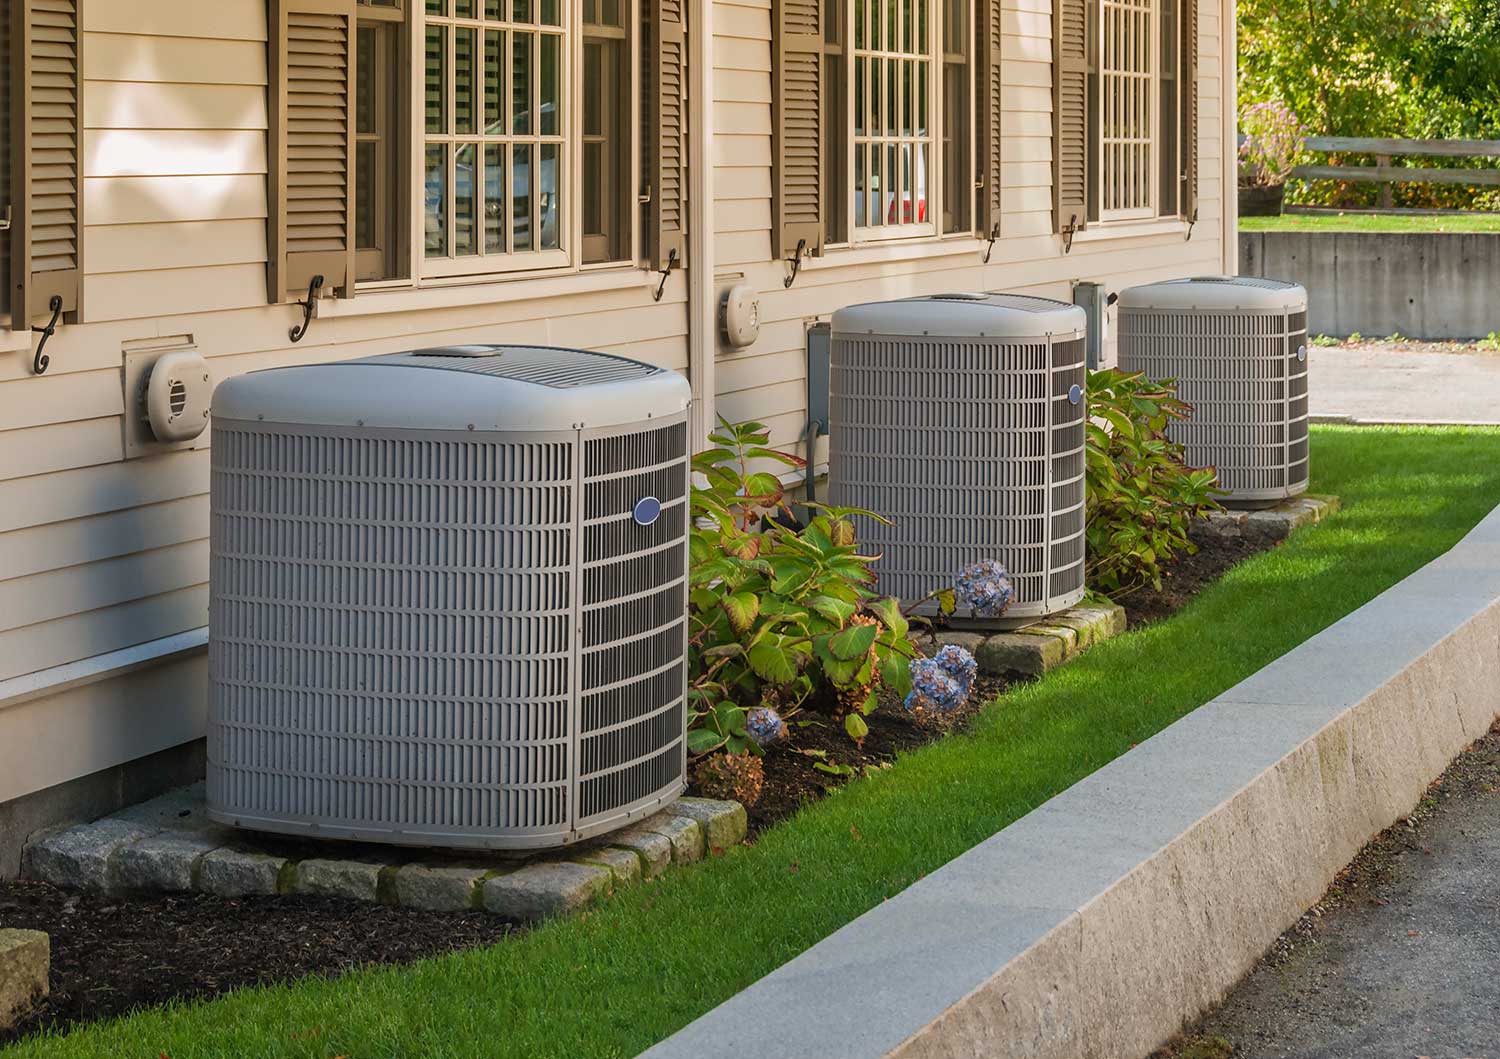 Recovering for Covid impacts on the Heating, Ventilation, and A/C business